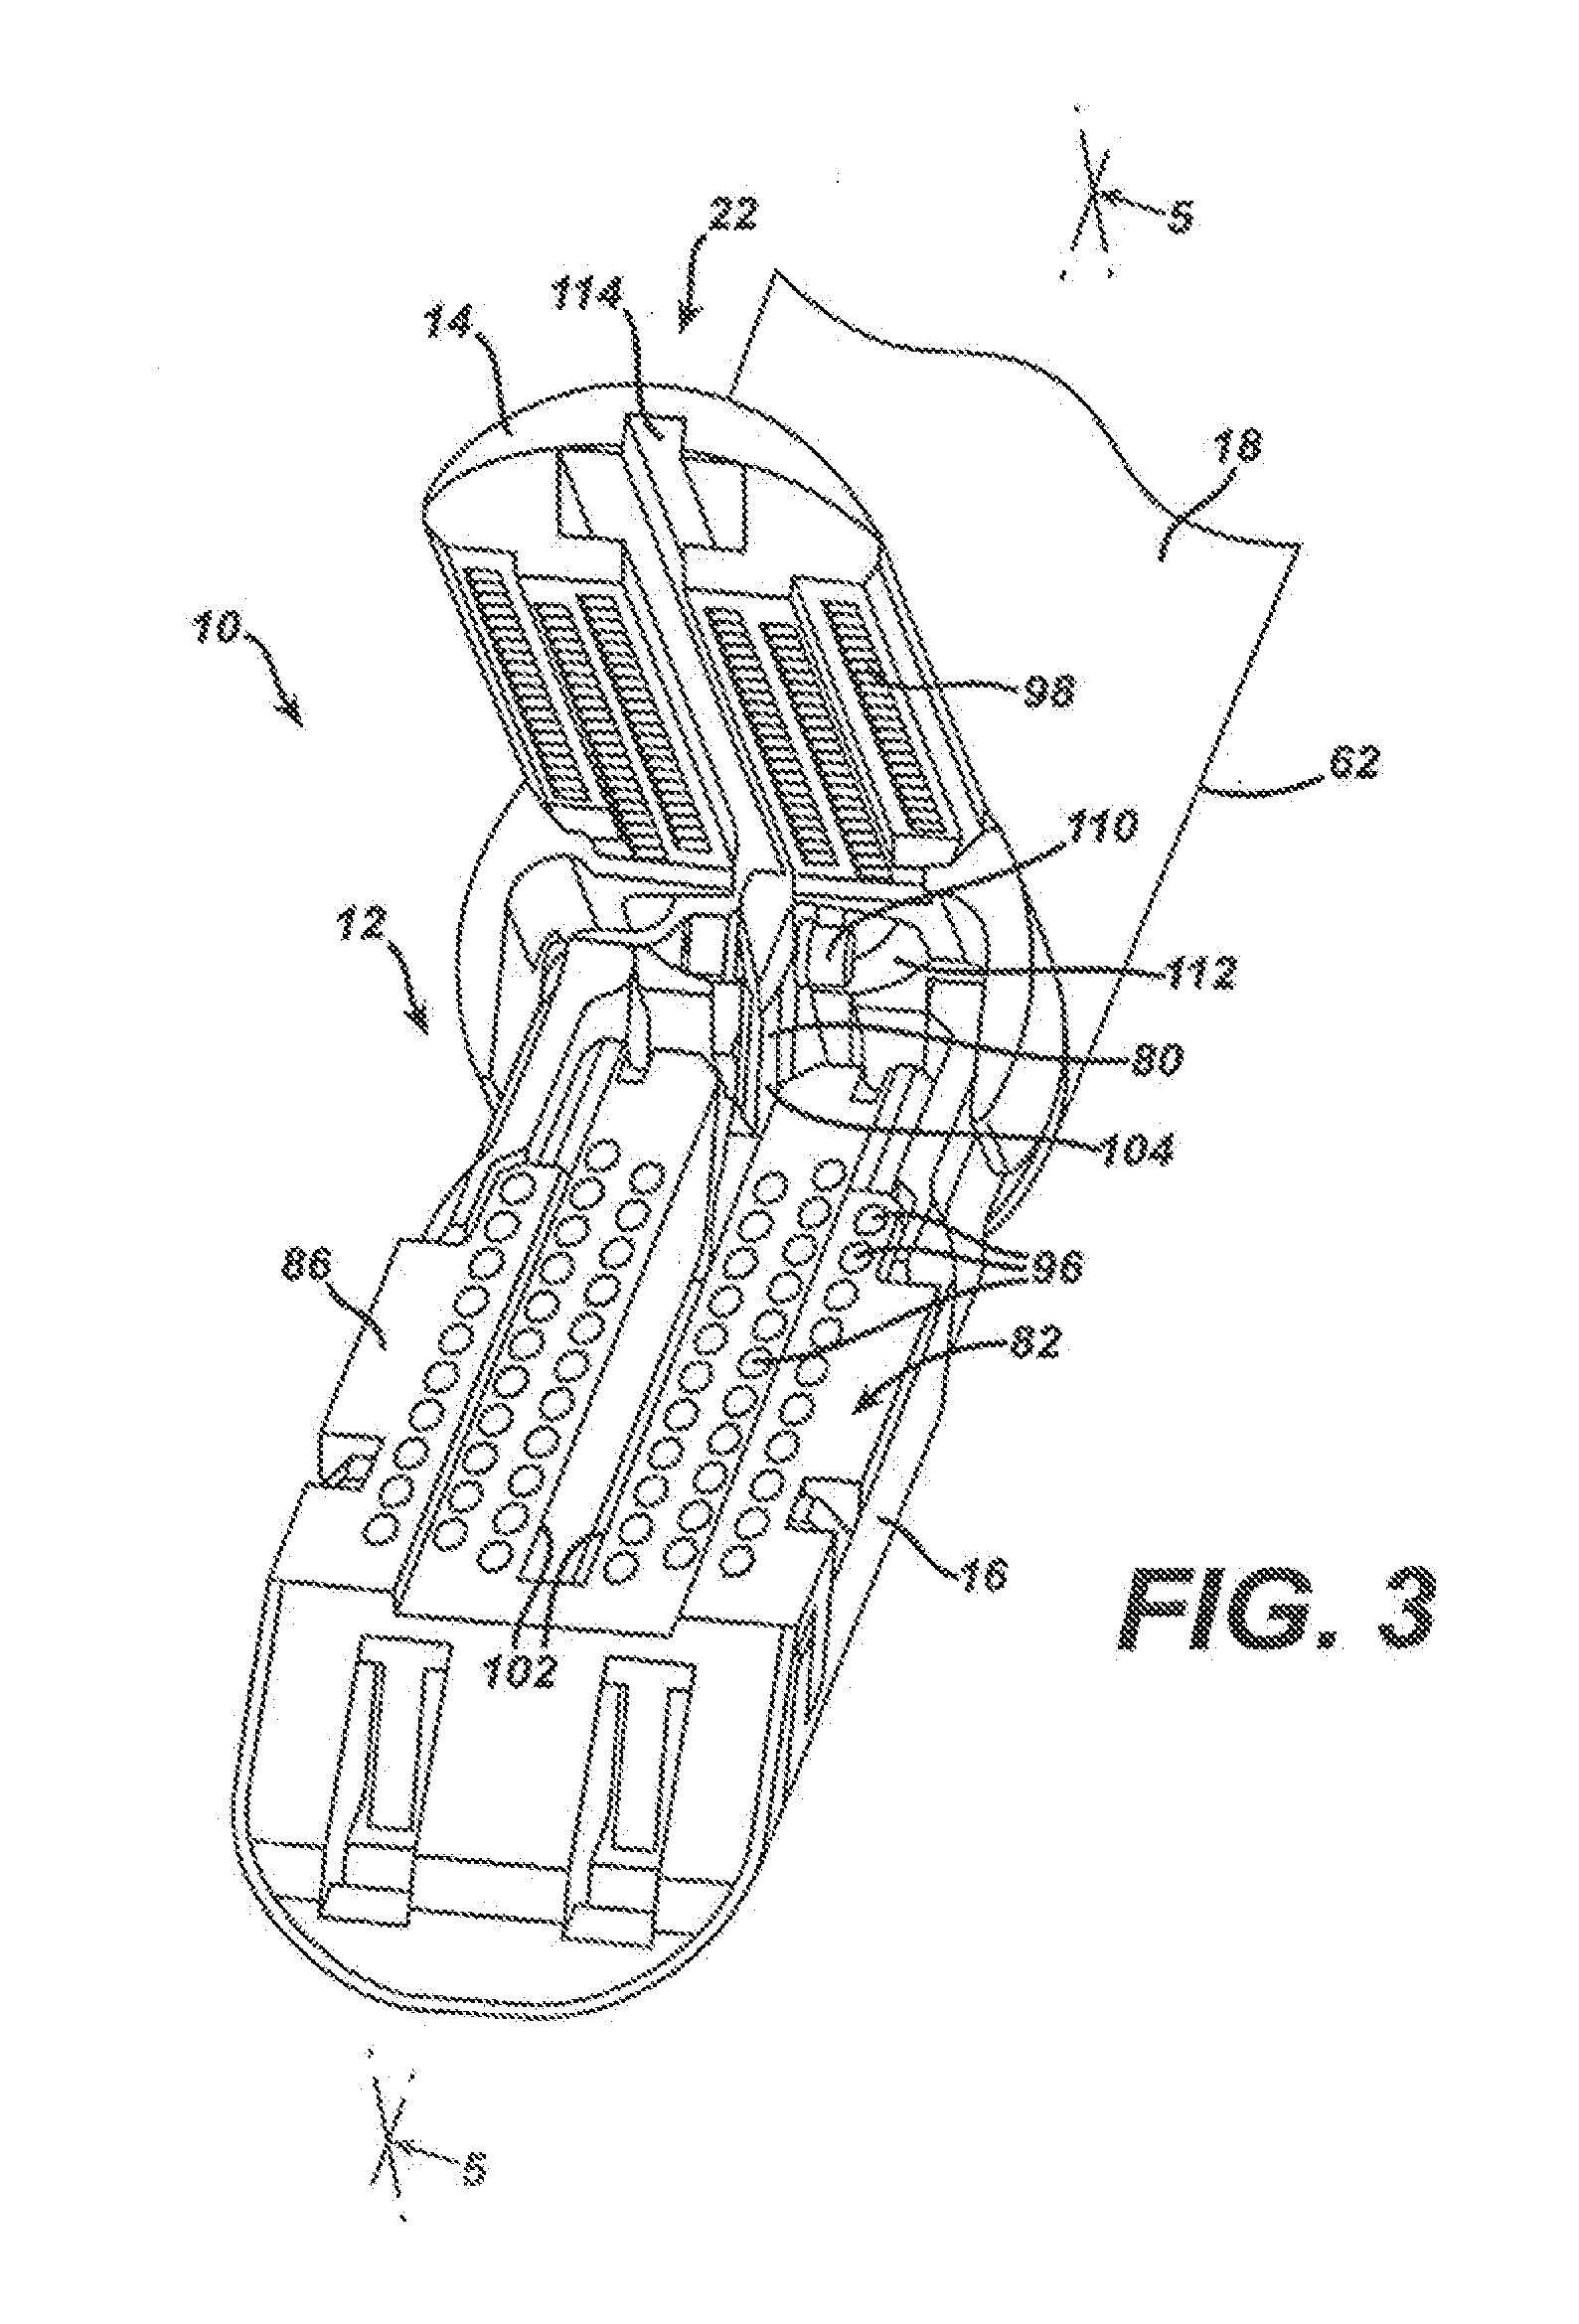 Surgical Stapling Instrument Having An Improved Coating